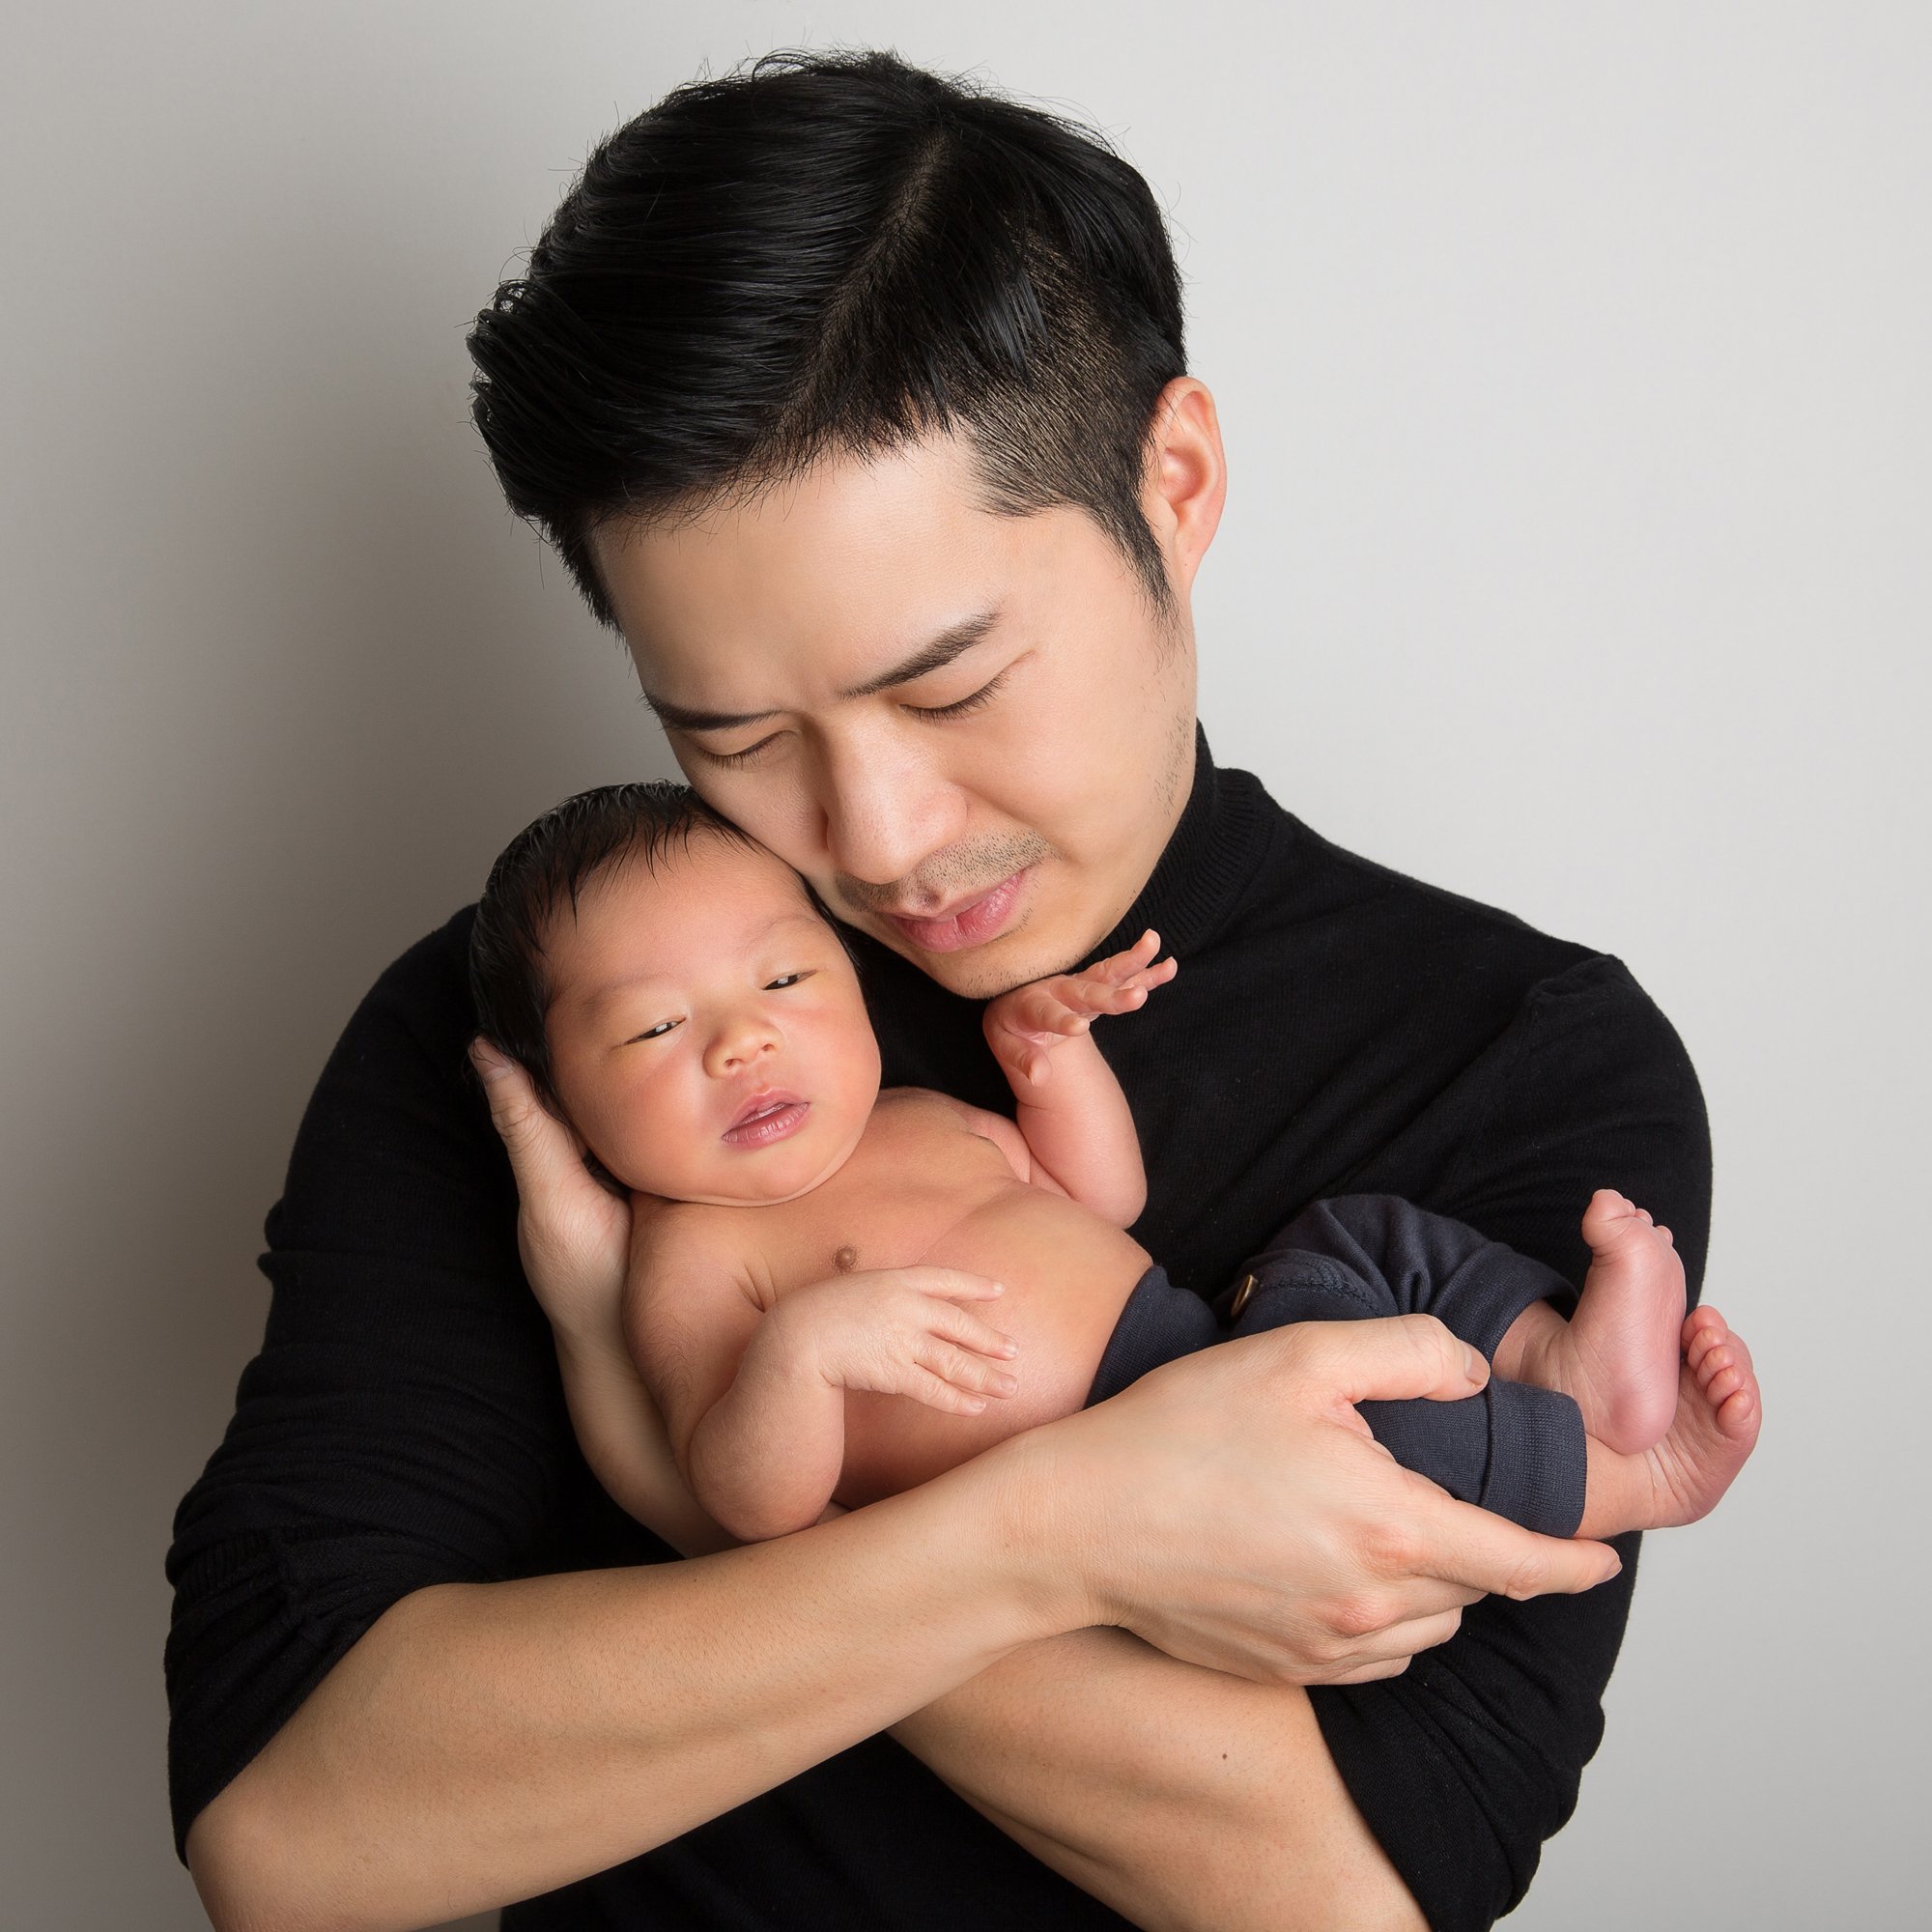 Newborn photographer who comes to your home in Belgravia